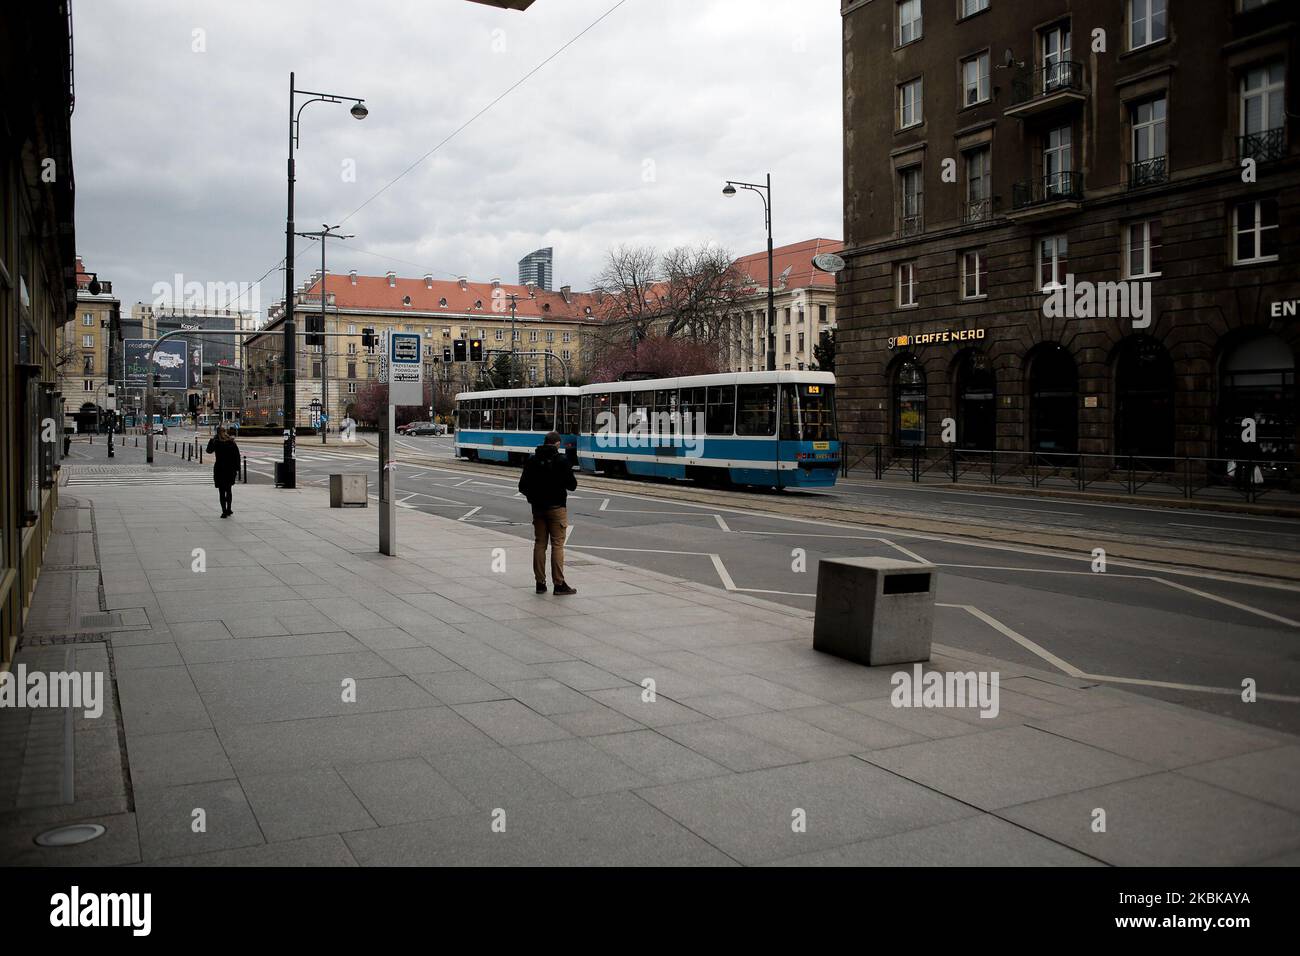 View of a empty Wroclaw, Poland on March 21, 2020 during the quarantine continues. Mateusz Morawiecki, the Prime Minister of Poland announced yesterday evening an Epidemic Emergency State in Poland. WIth another 27 new cases of coronavirus in Poland by 5pm, raising the total count to 452, schools will remain closed until Easter. (Photo by Krzysztof Zatycki/NurPhoto) Stock Photo